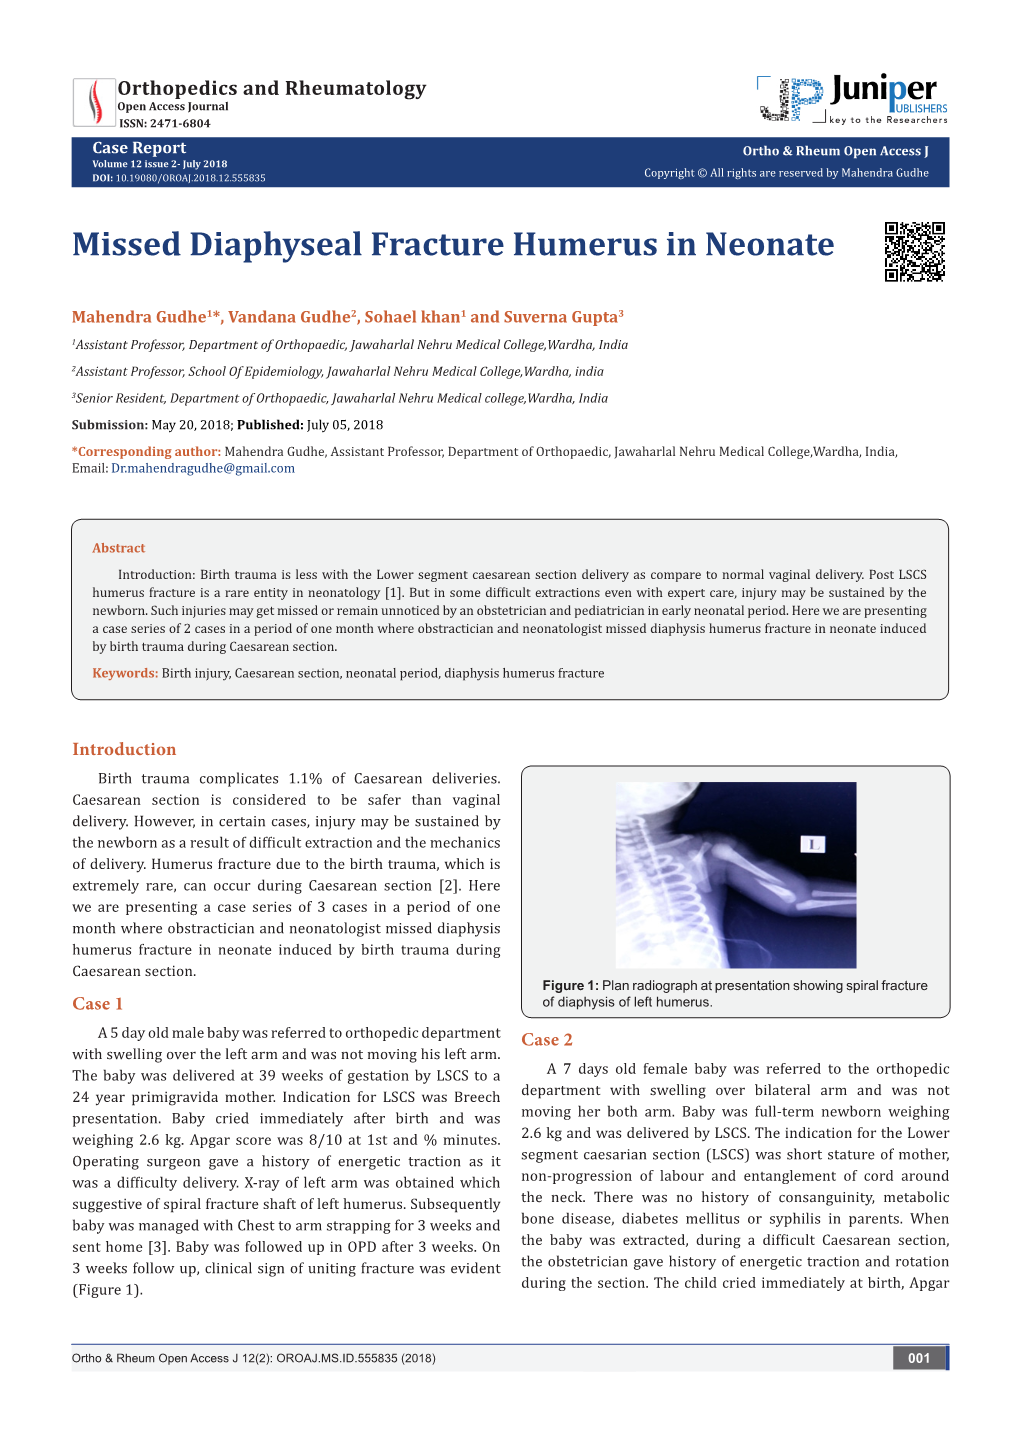 Missed Diaphyseal Fracture Humerus in Neonate